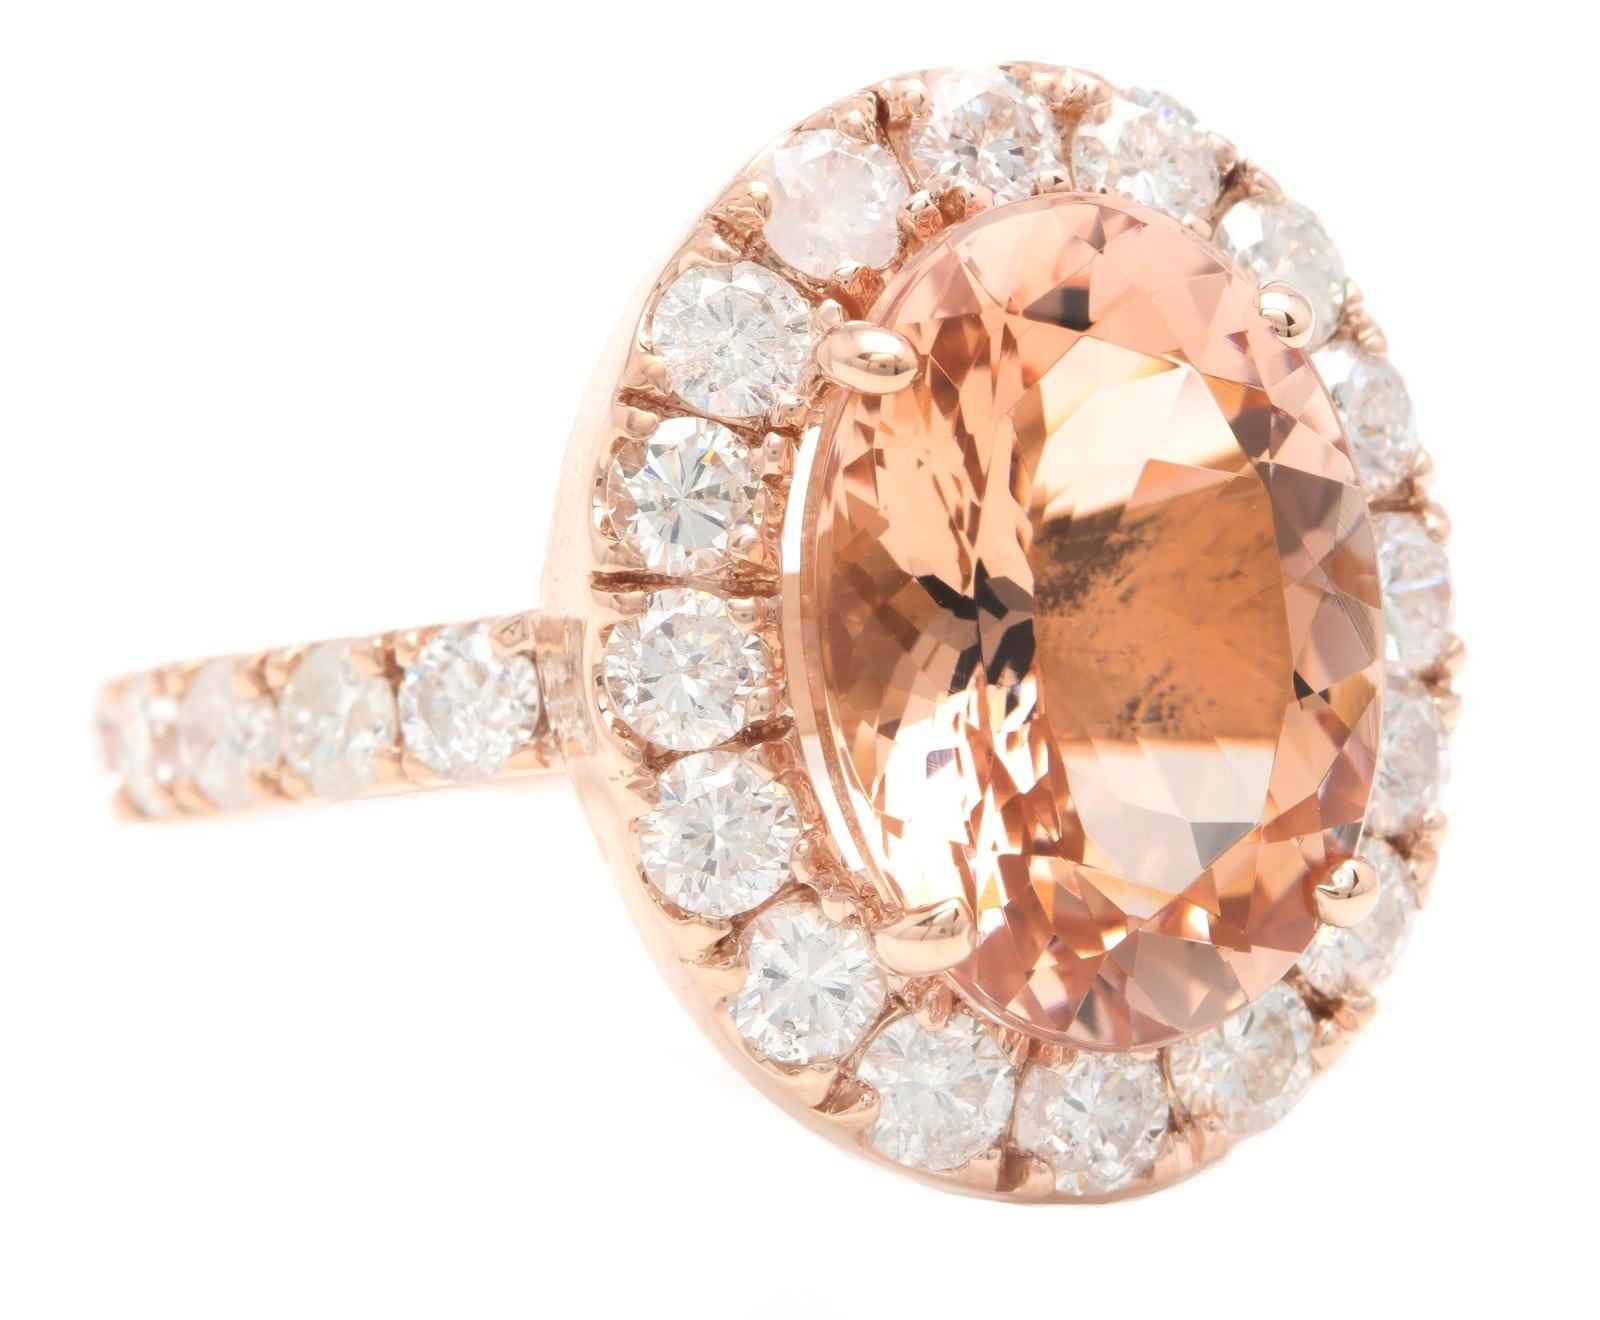 7.80 Carats Impressive Natural Morganite and Diamond 14K Solid Rose Gold Ring

Suggested Replacement Value: Approx. $8,000.00

Total Morganite Weight is: Approx. 6.00 Carats

Morganite Treatment: Heating

Morganite Measures: Approx. 14.00 x